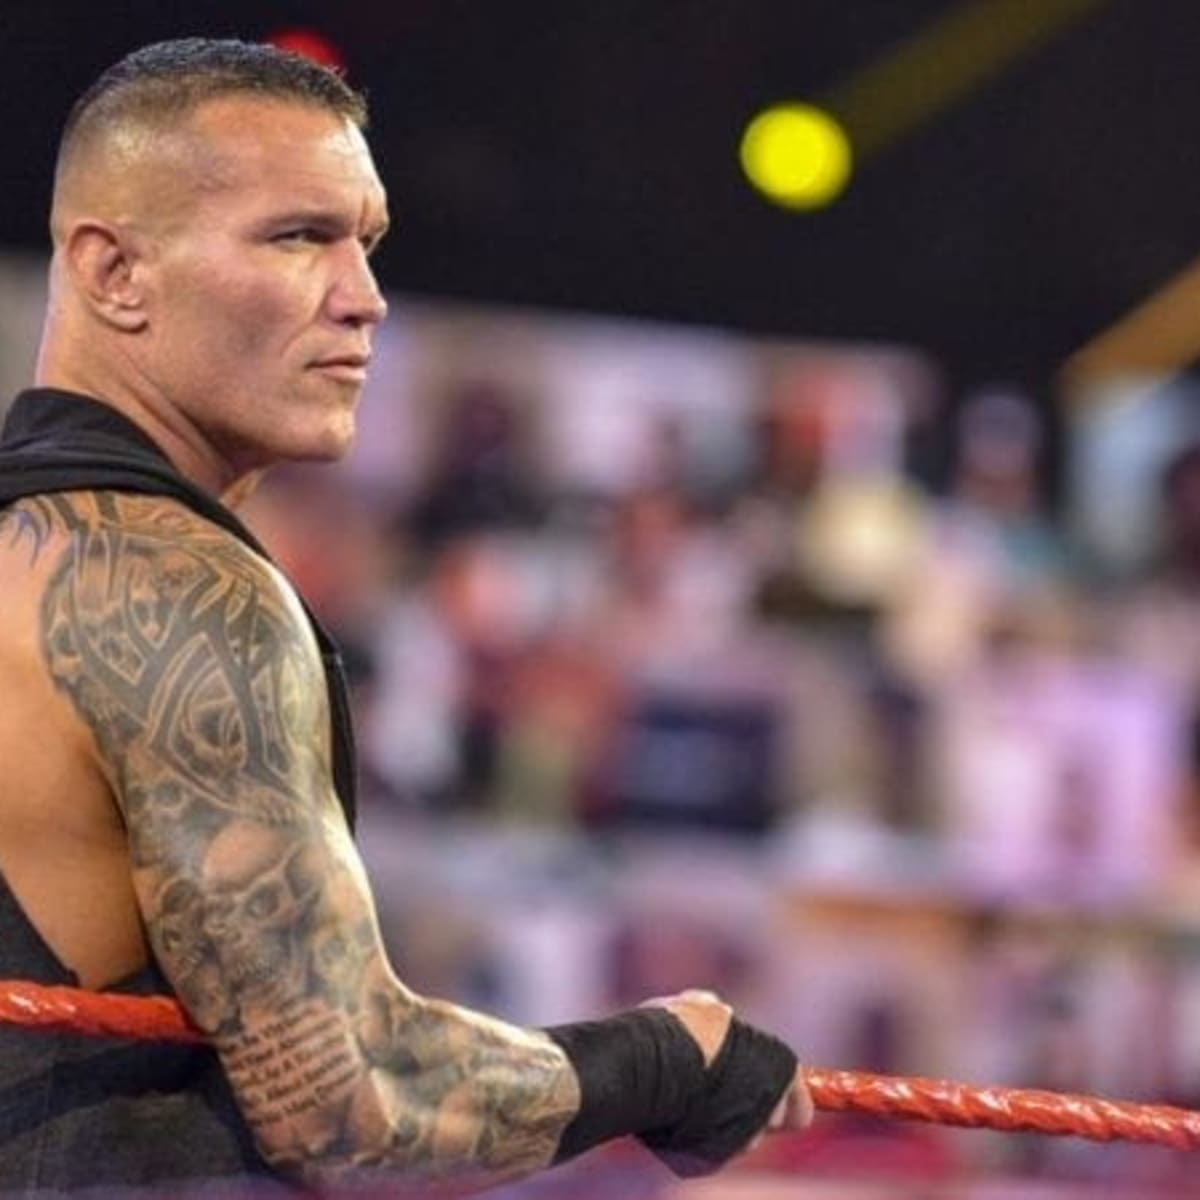 Randy Ortons Tattoo Artist Sues WWE 2K Games For Stealing Designs